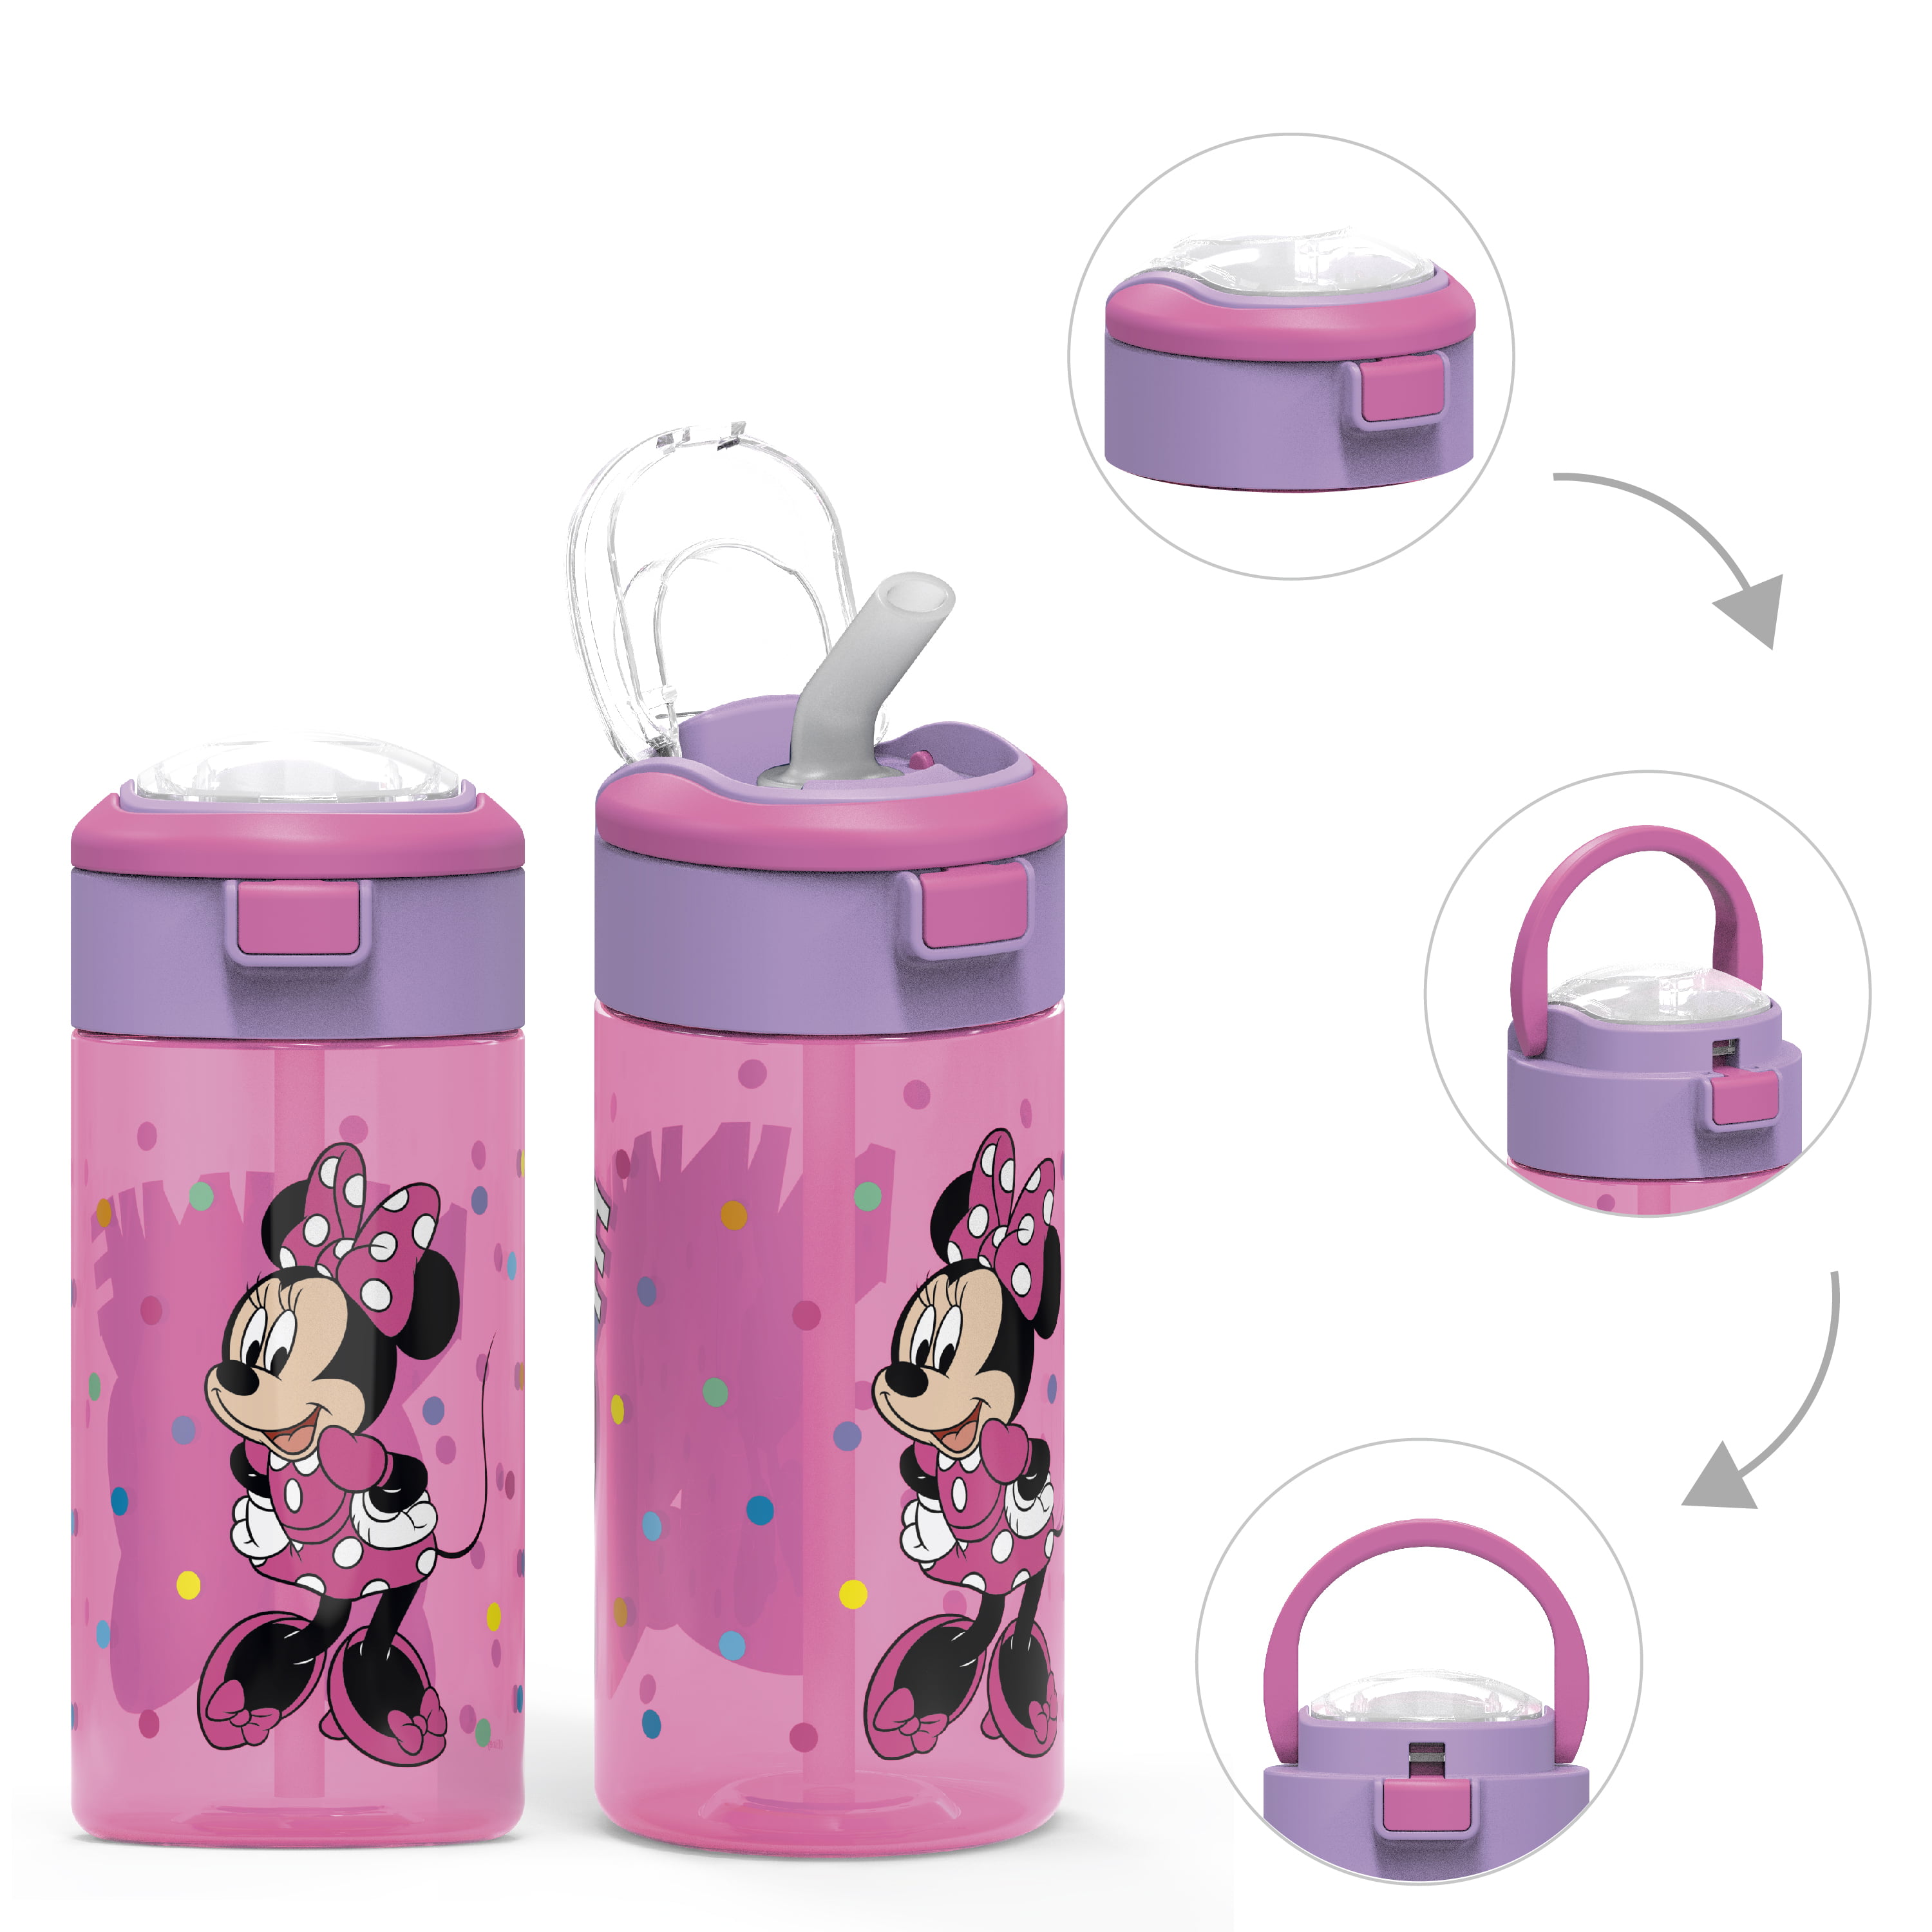 NEW Zak Disney MINNIE MOUSE Water Bottle Snack Container DAISY DUCK Travel Cup 